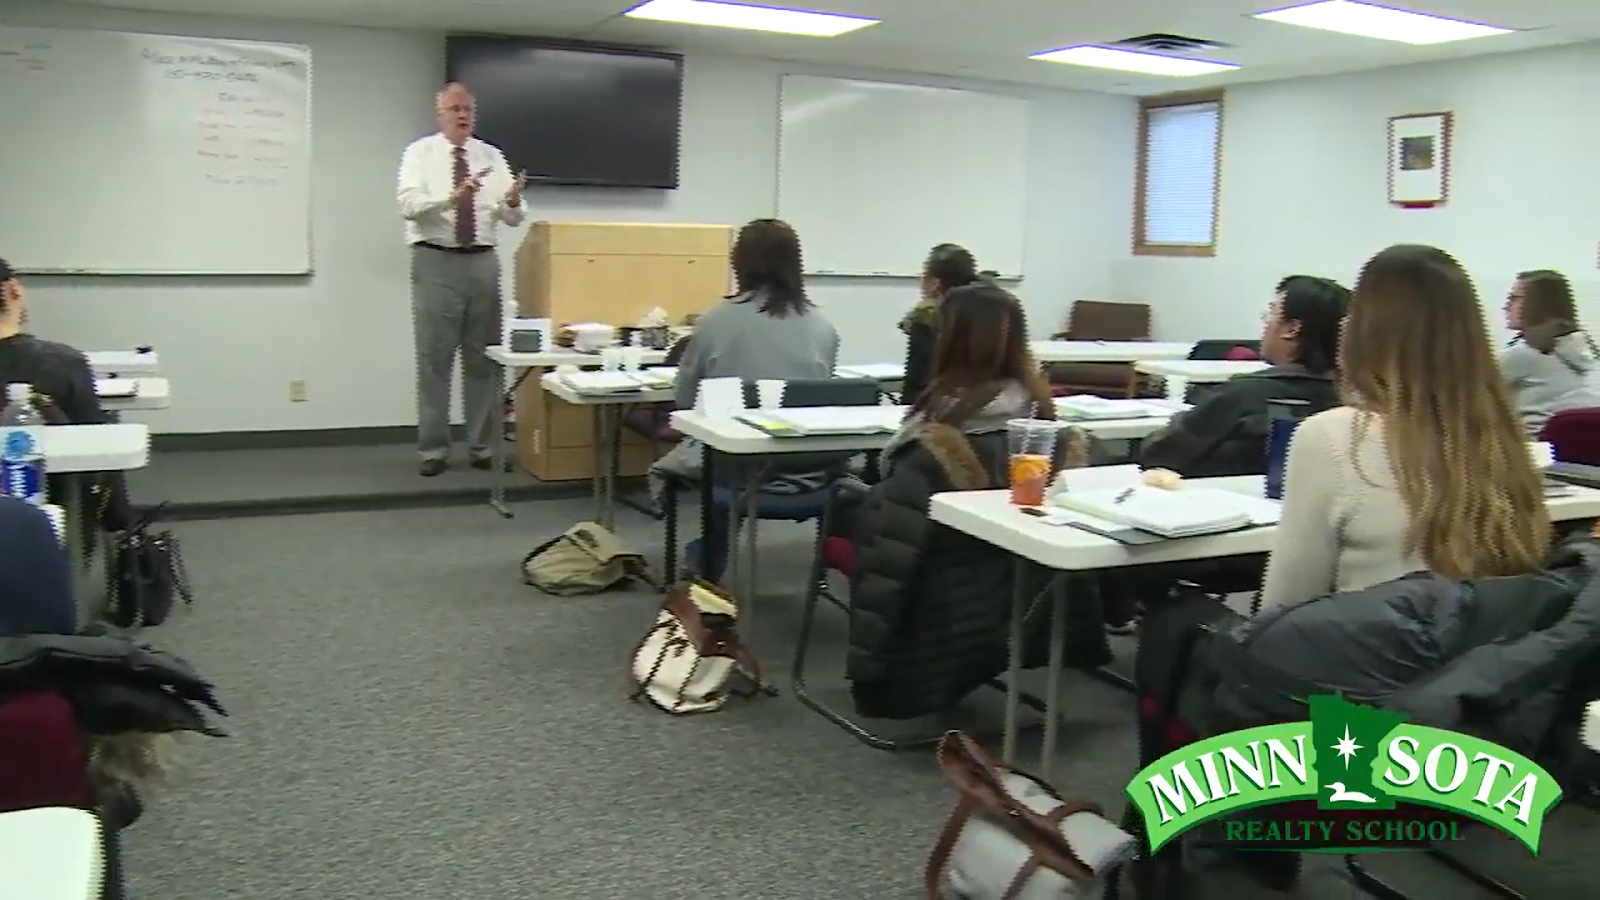 A Minnesota Realty School instructor, Mike Brennan, teaching a prelicensing course.